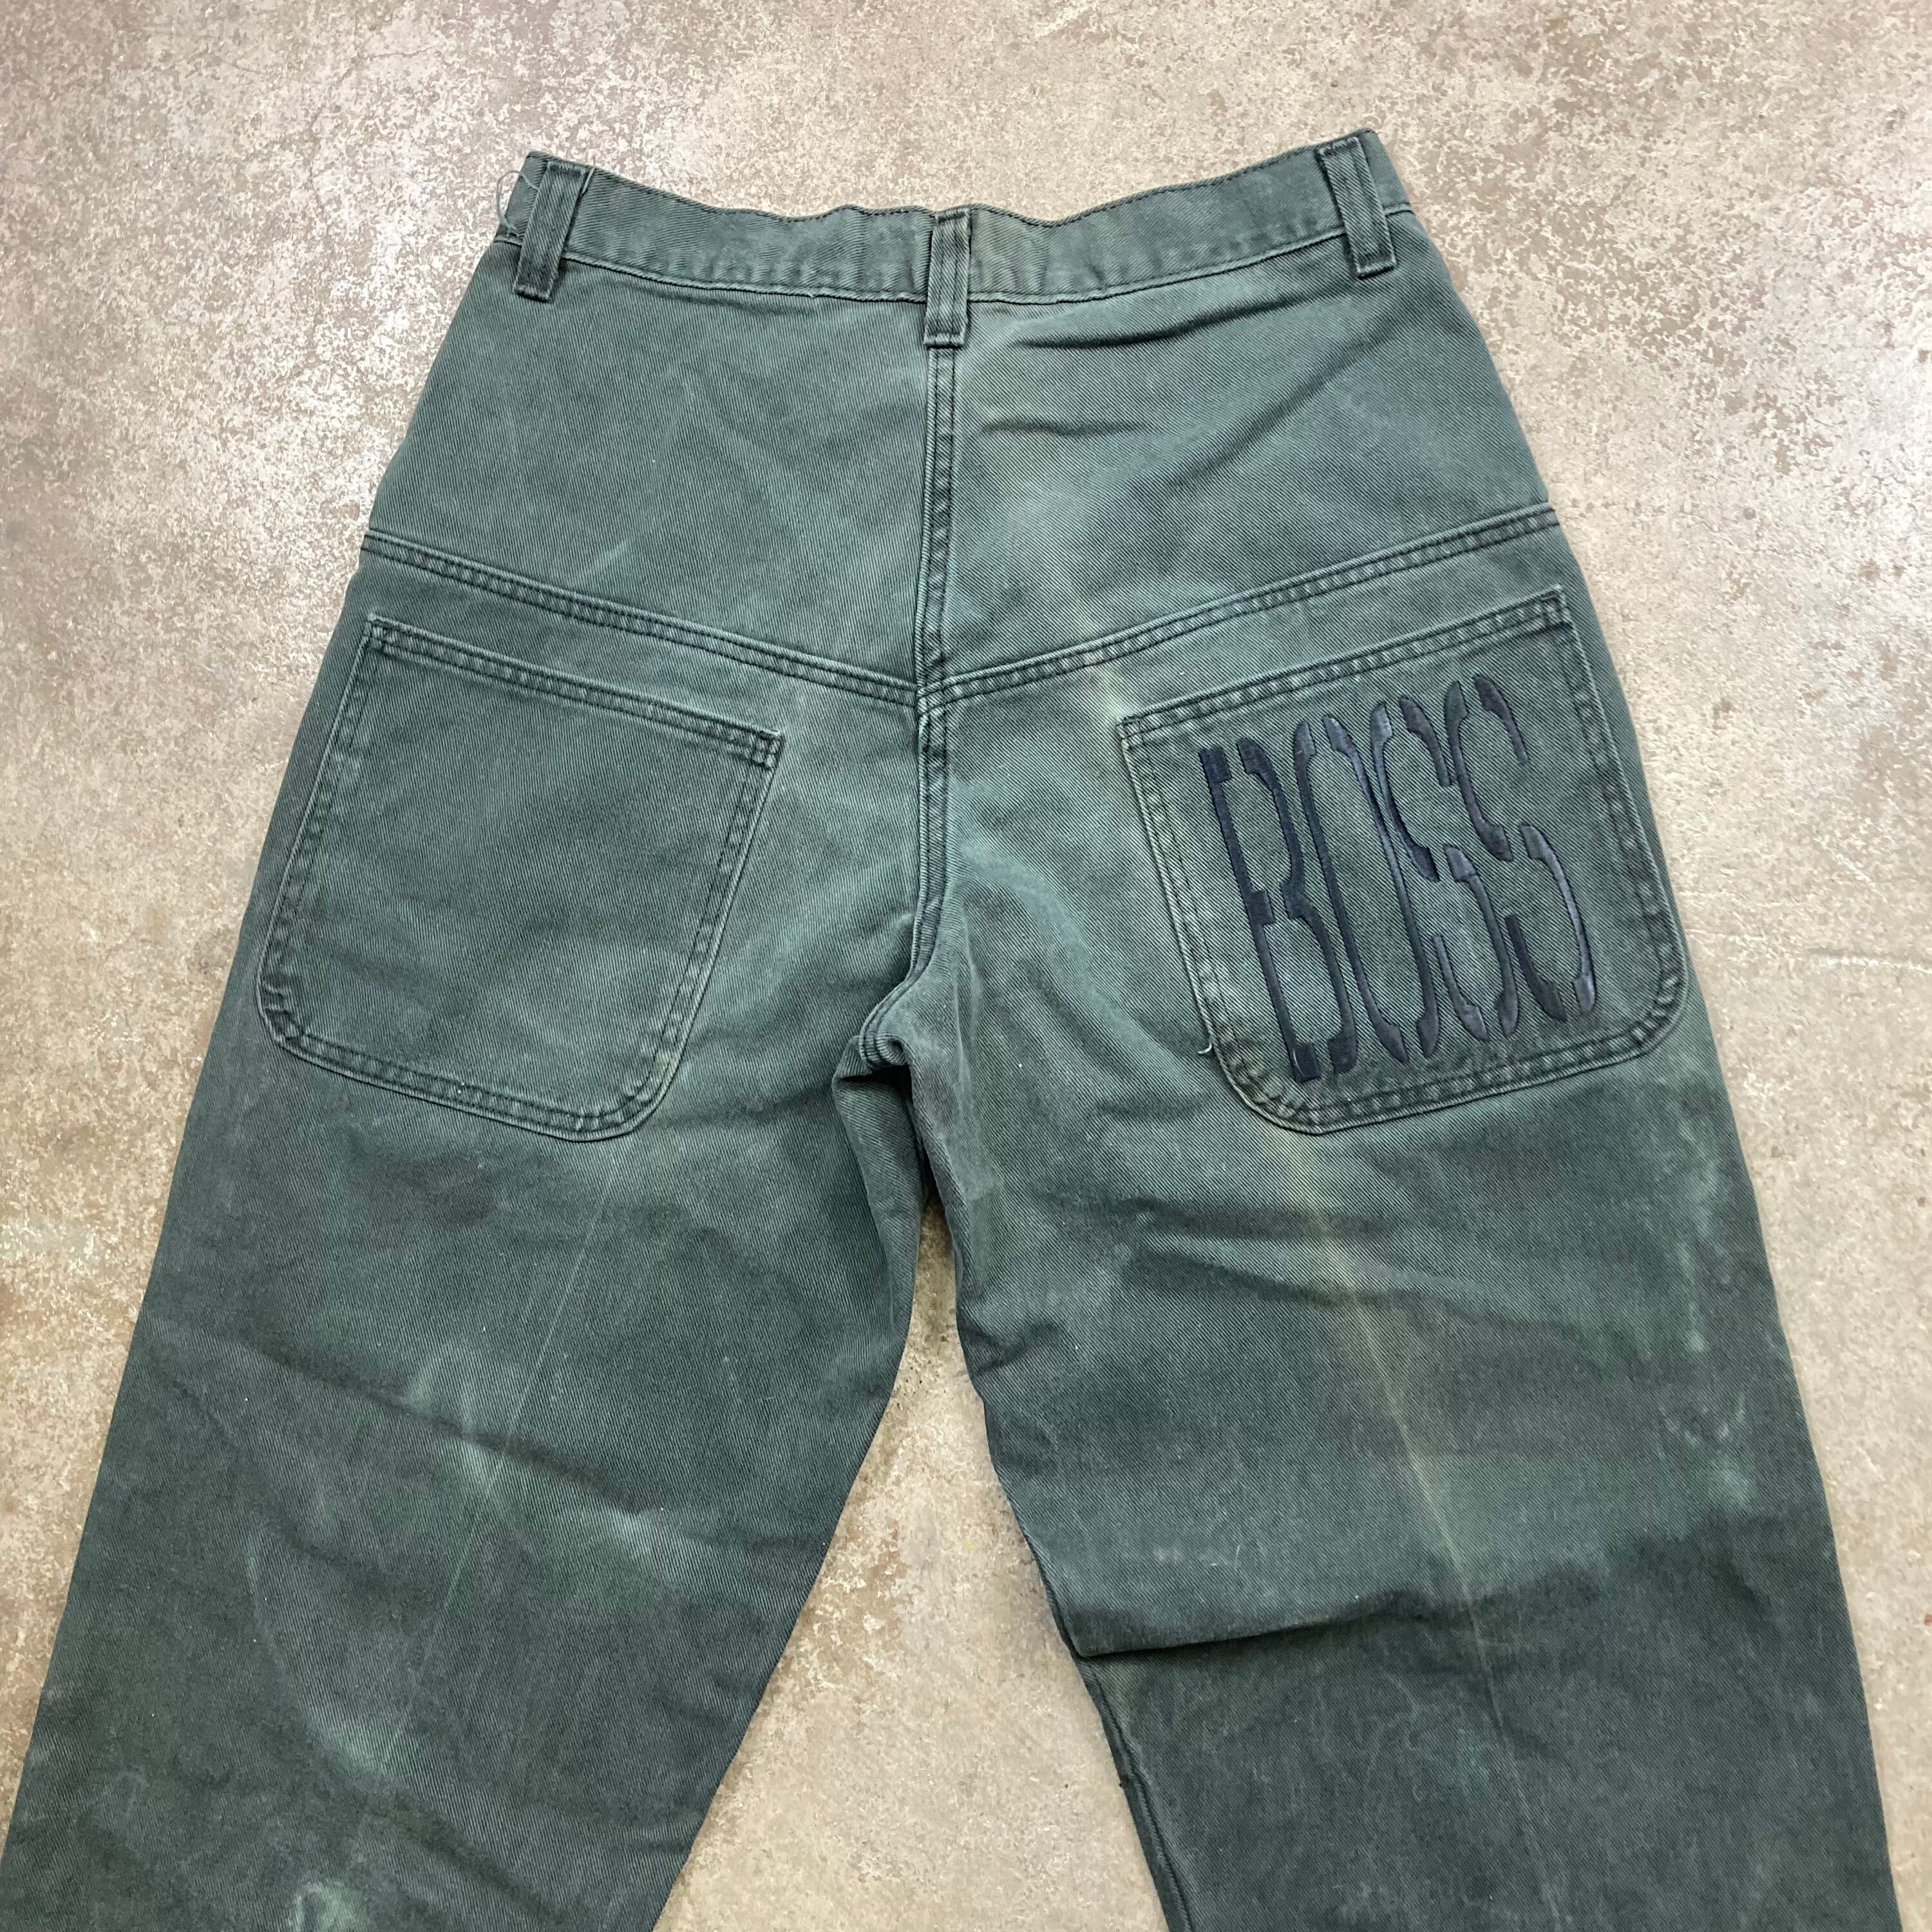 Vintage 1980s 90s Baggy Green Jeans Size 33x31.5 - Etsy